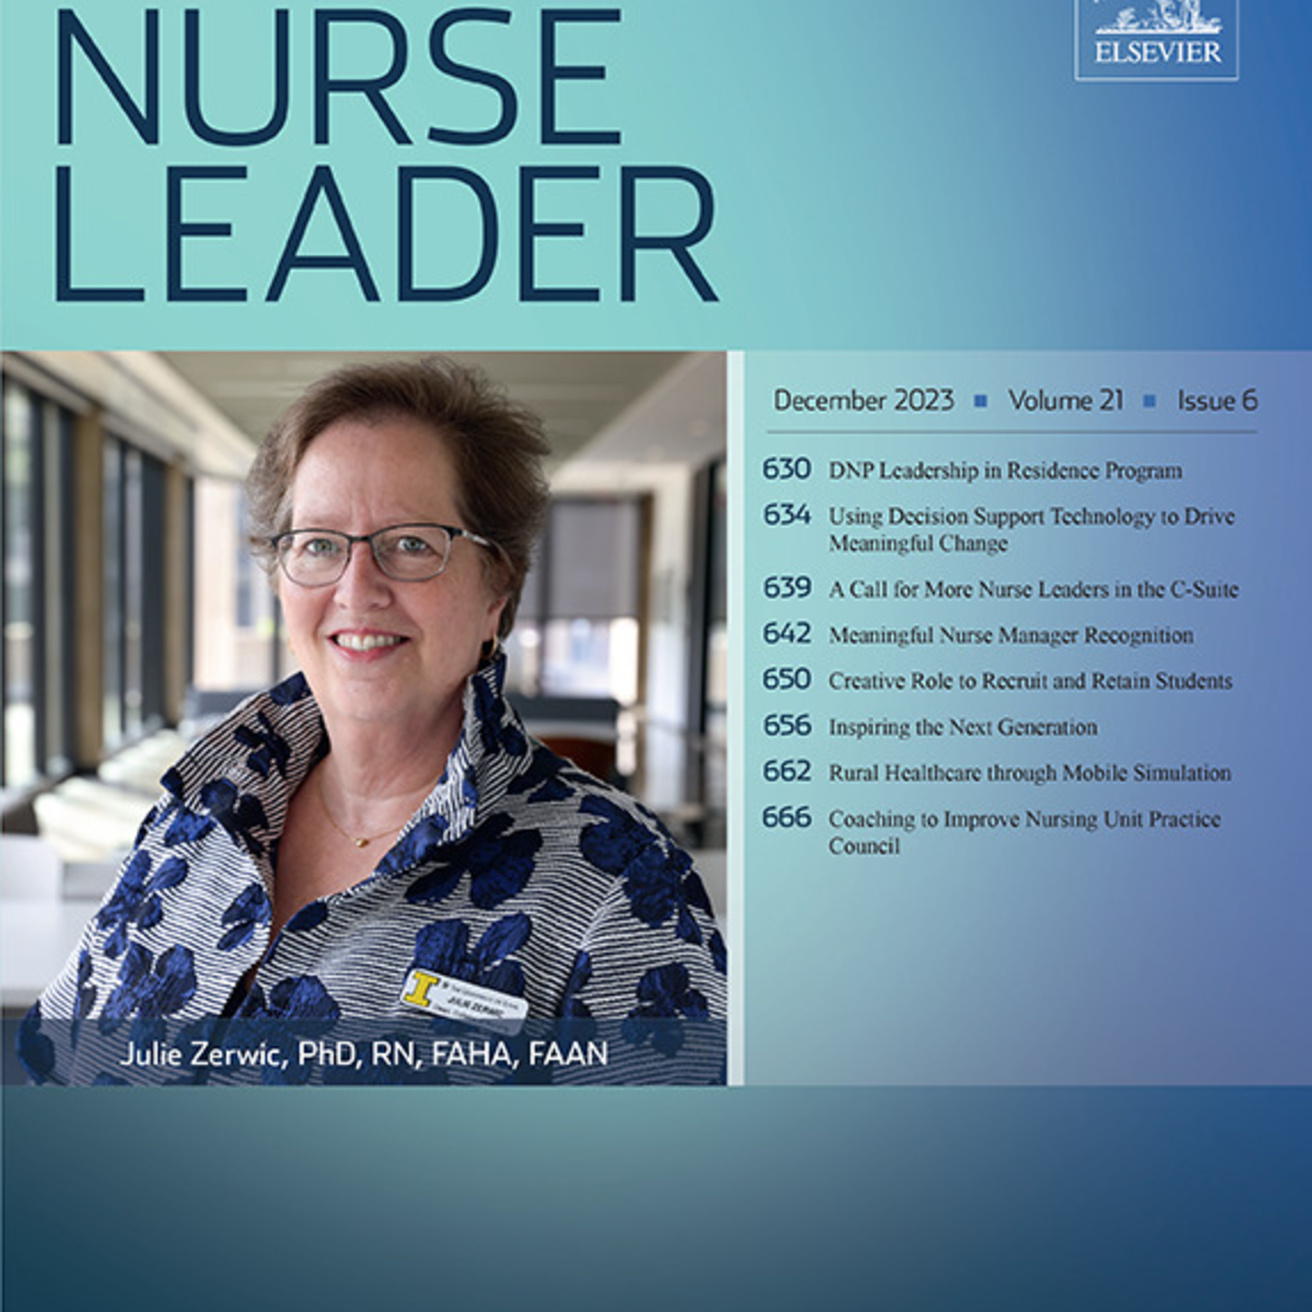 Cover of Nurse Leader journal. Blue cover with portrait of Dean Zerwic on it. 